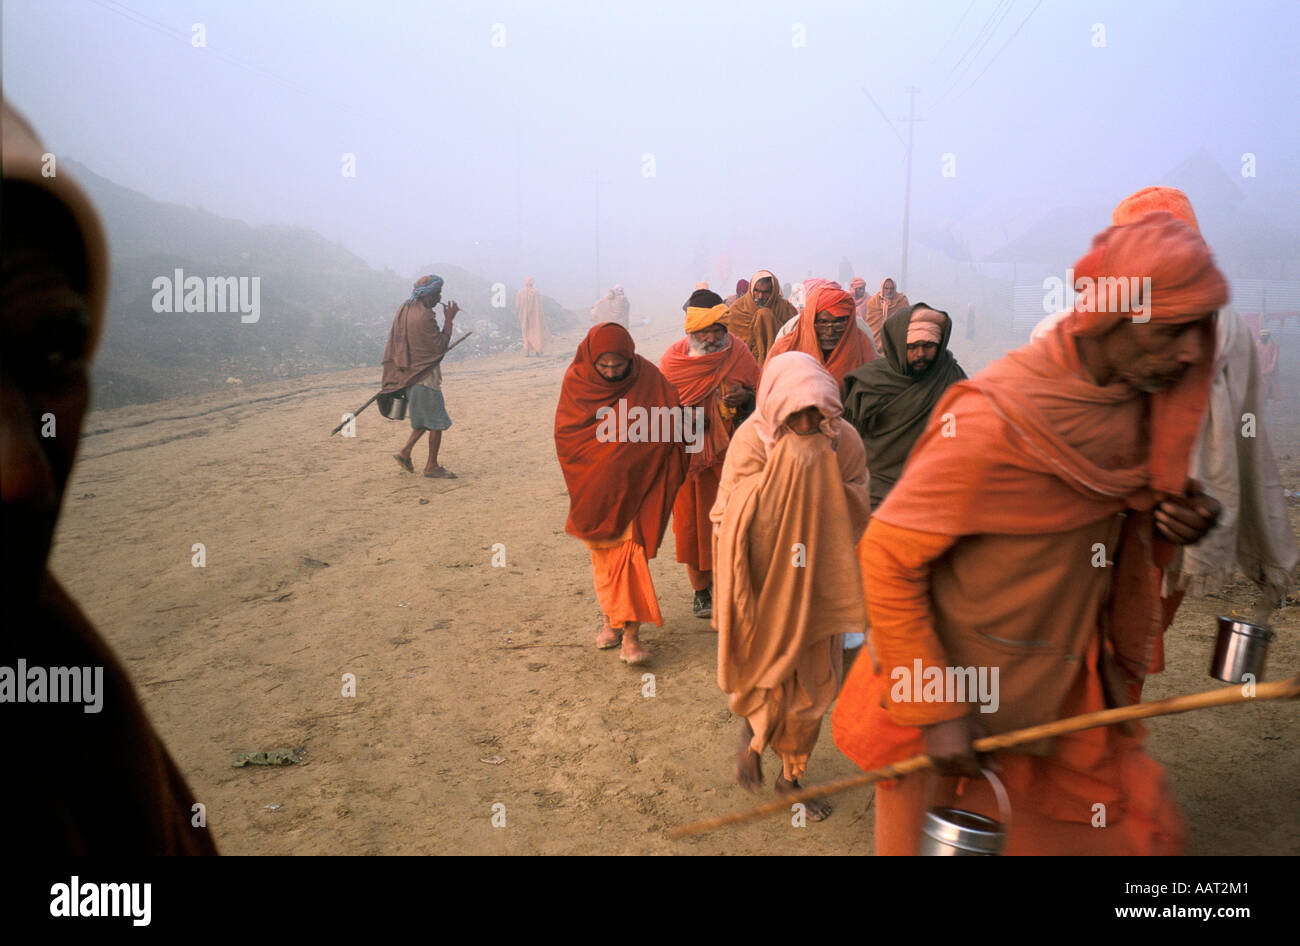 KUMBH MELA INDIA 2001 SADHUS WALKING TO A PLACE WHERE THEY ARE GIVEN FOOD INSIDE THE FESTIVAL SITE ALLAHABAD 2001 Stock Photo